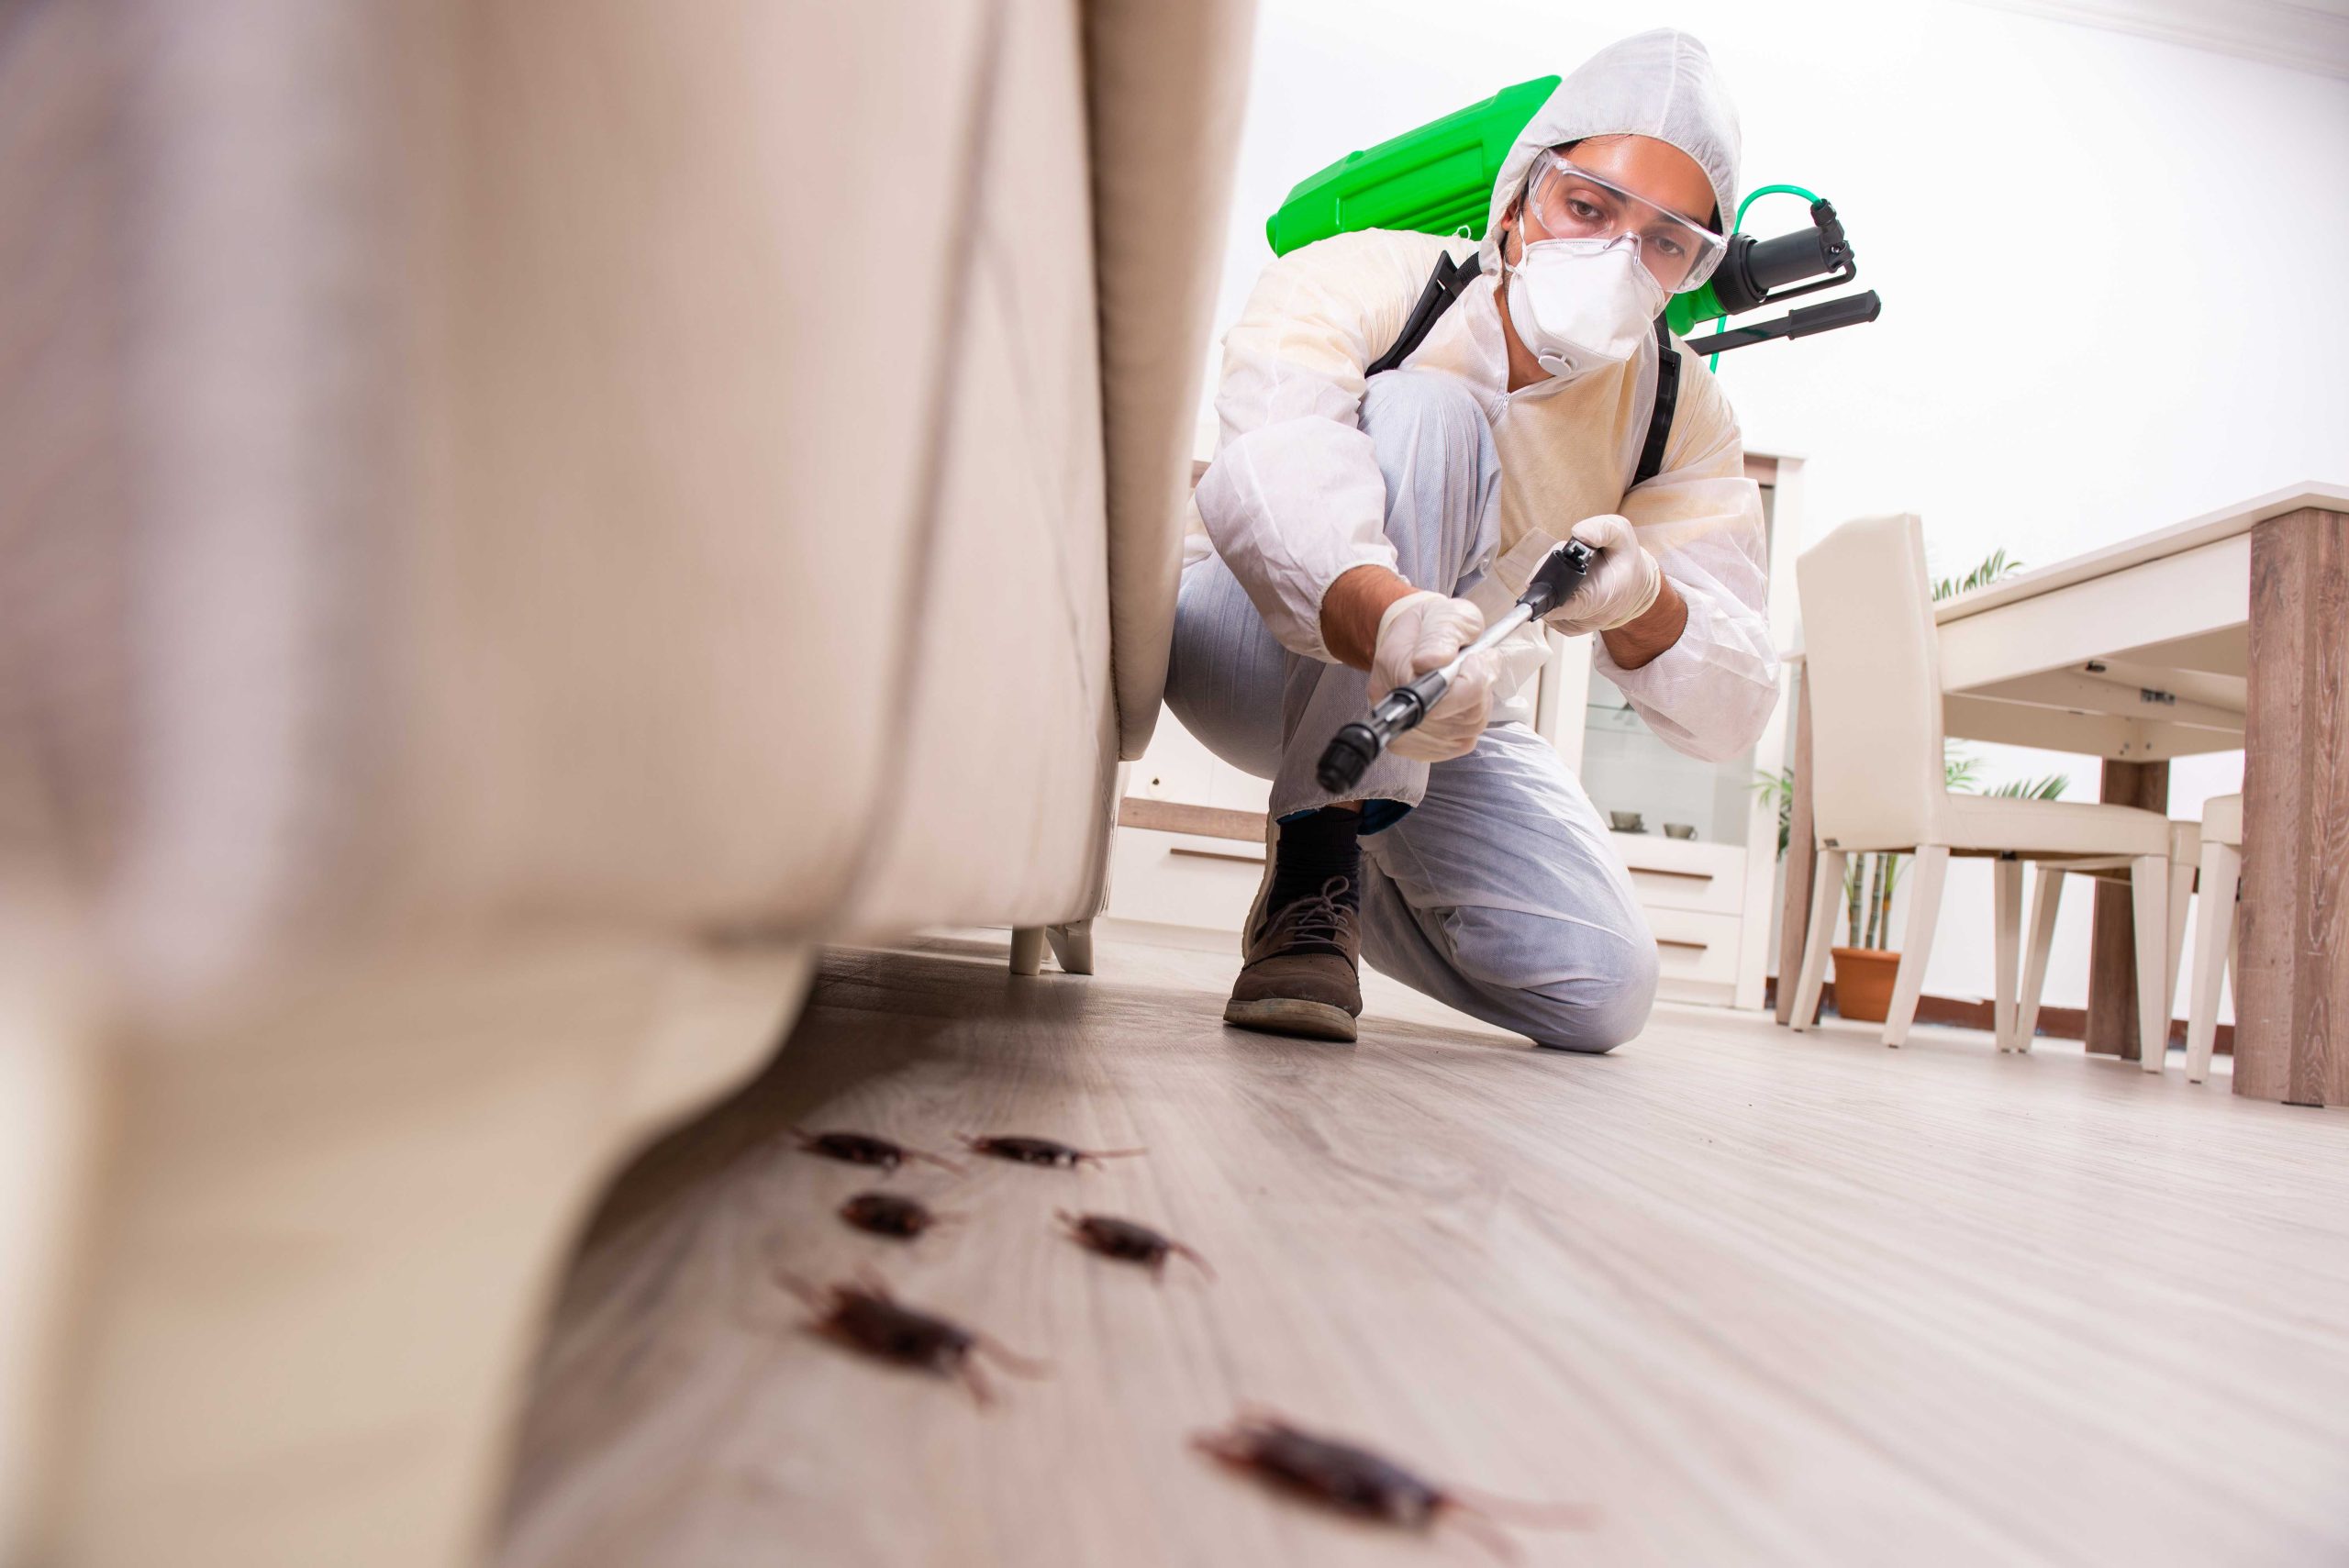 A termite inspections expert has defeated a gang of termites taking over Bradenton, Florida.